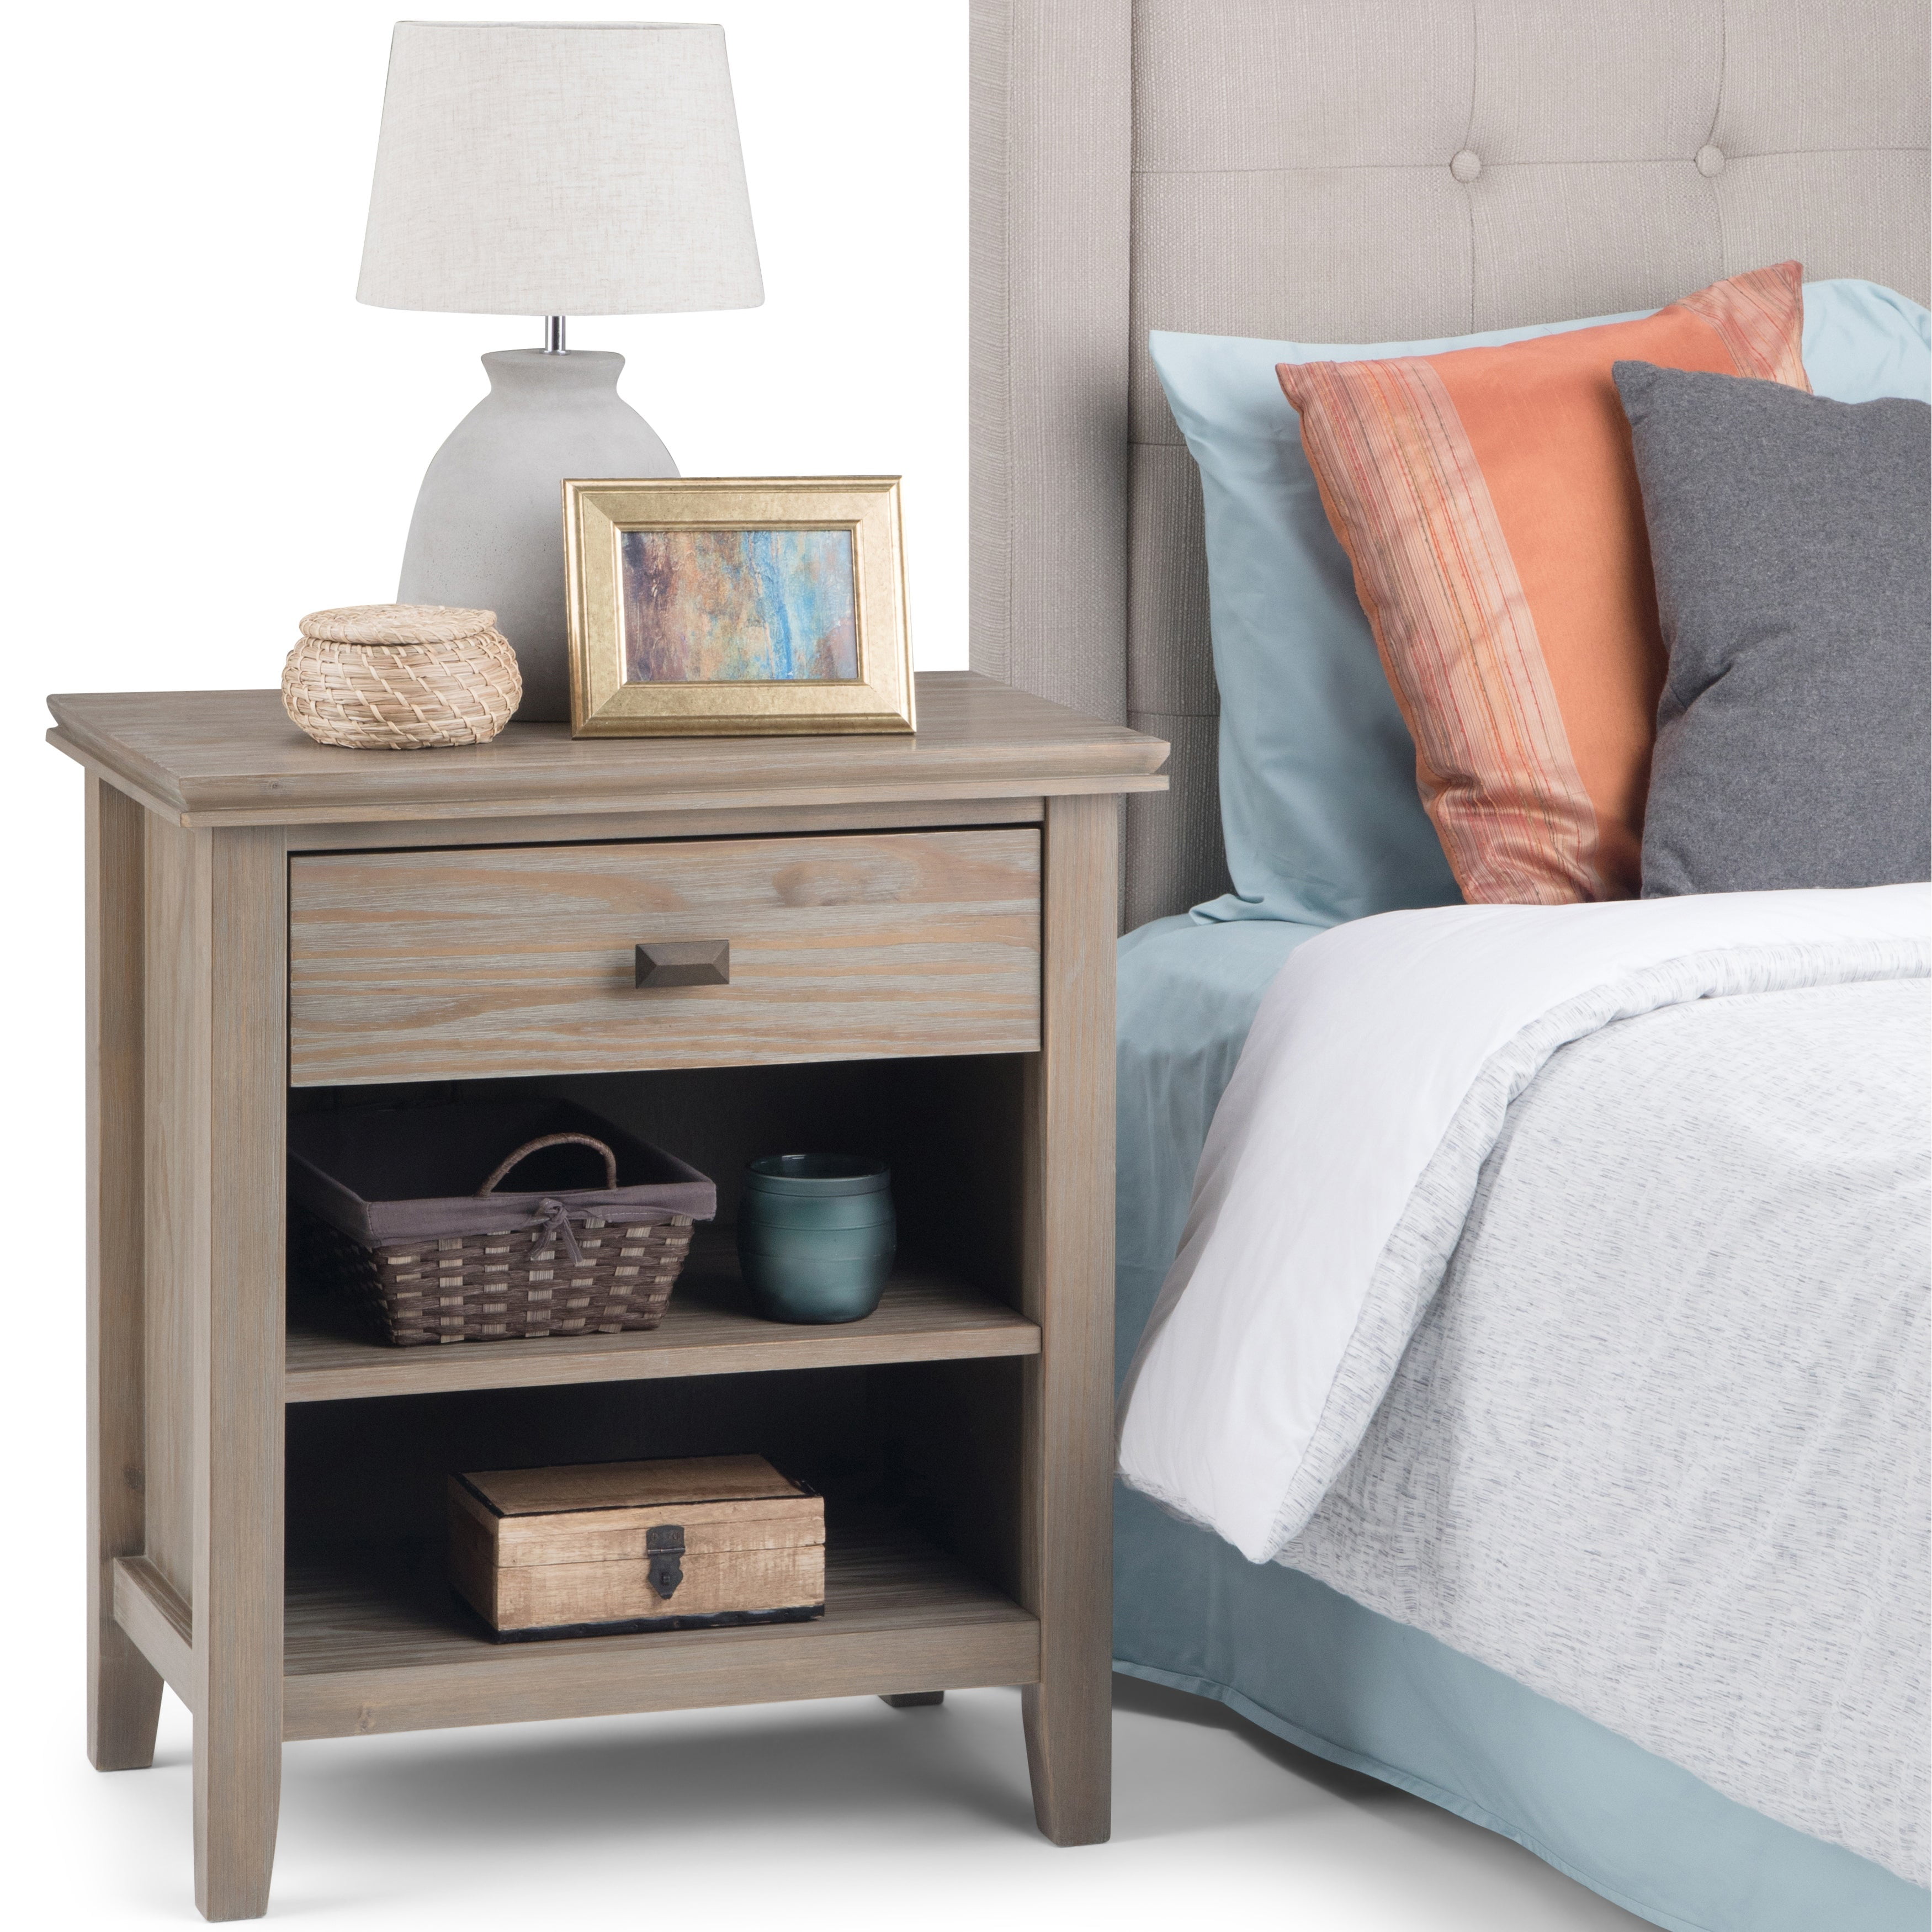 Bedside Table: Advice And Shopping